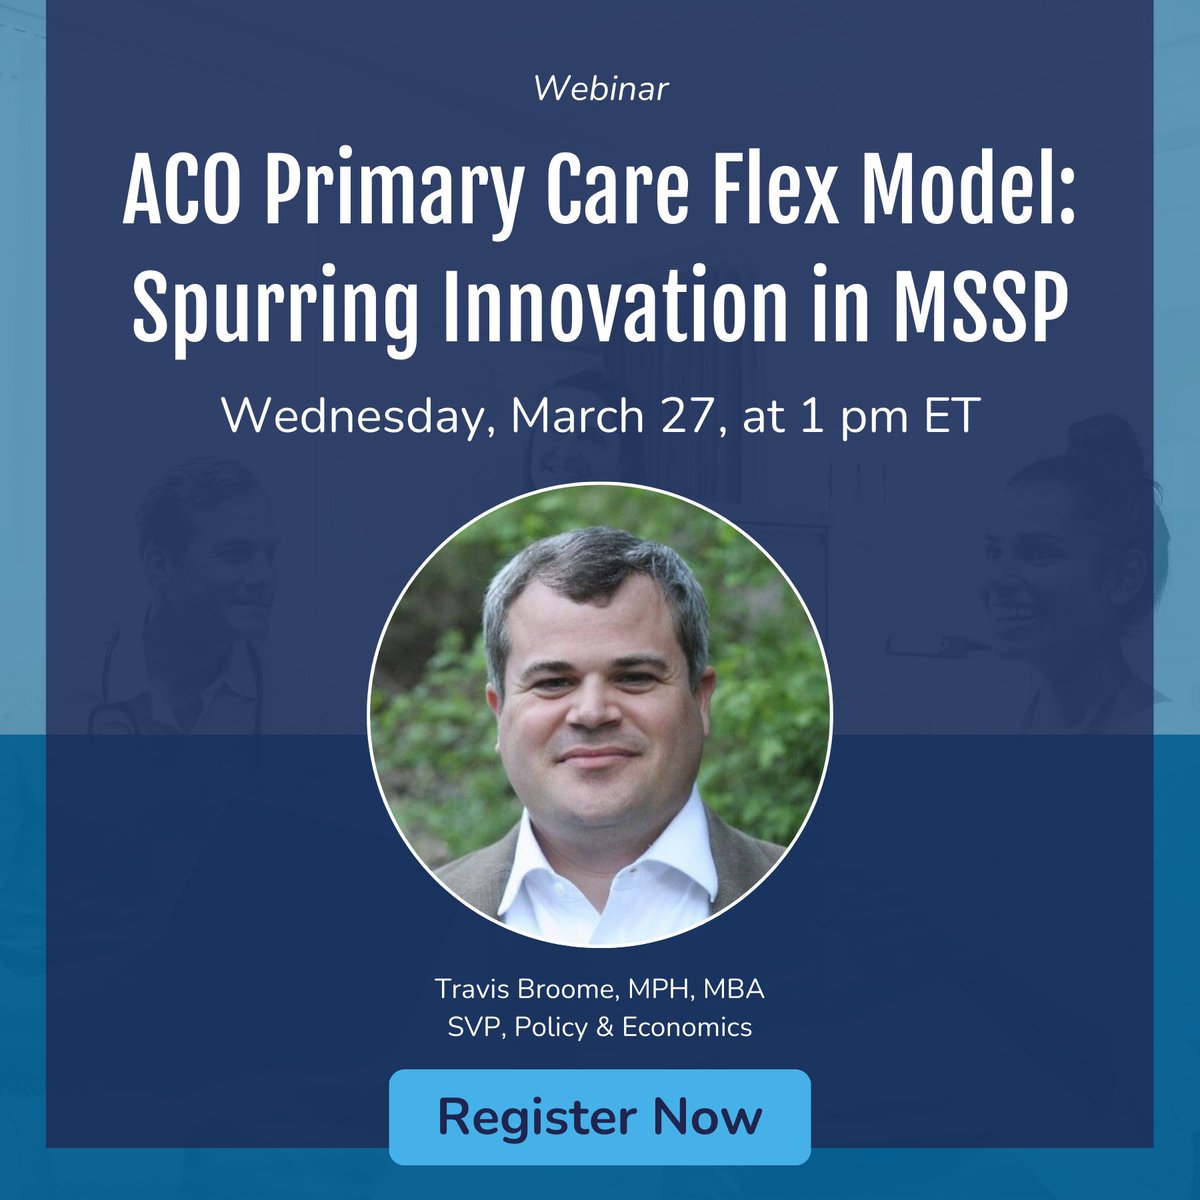 Participating in the Medicare Shared Savings Program in 2025? Don’t miss our upcoming webinar, where SVP, Policy & Economics, @Travis_Broome, will break down the new ACO Primary Care Flex Model. Register here: bit.ly/43BPPqP